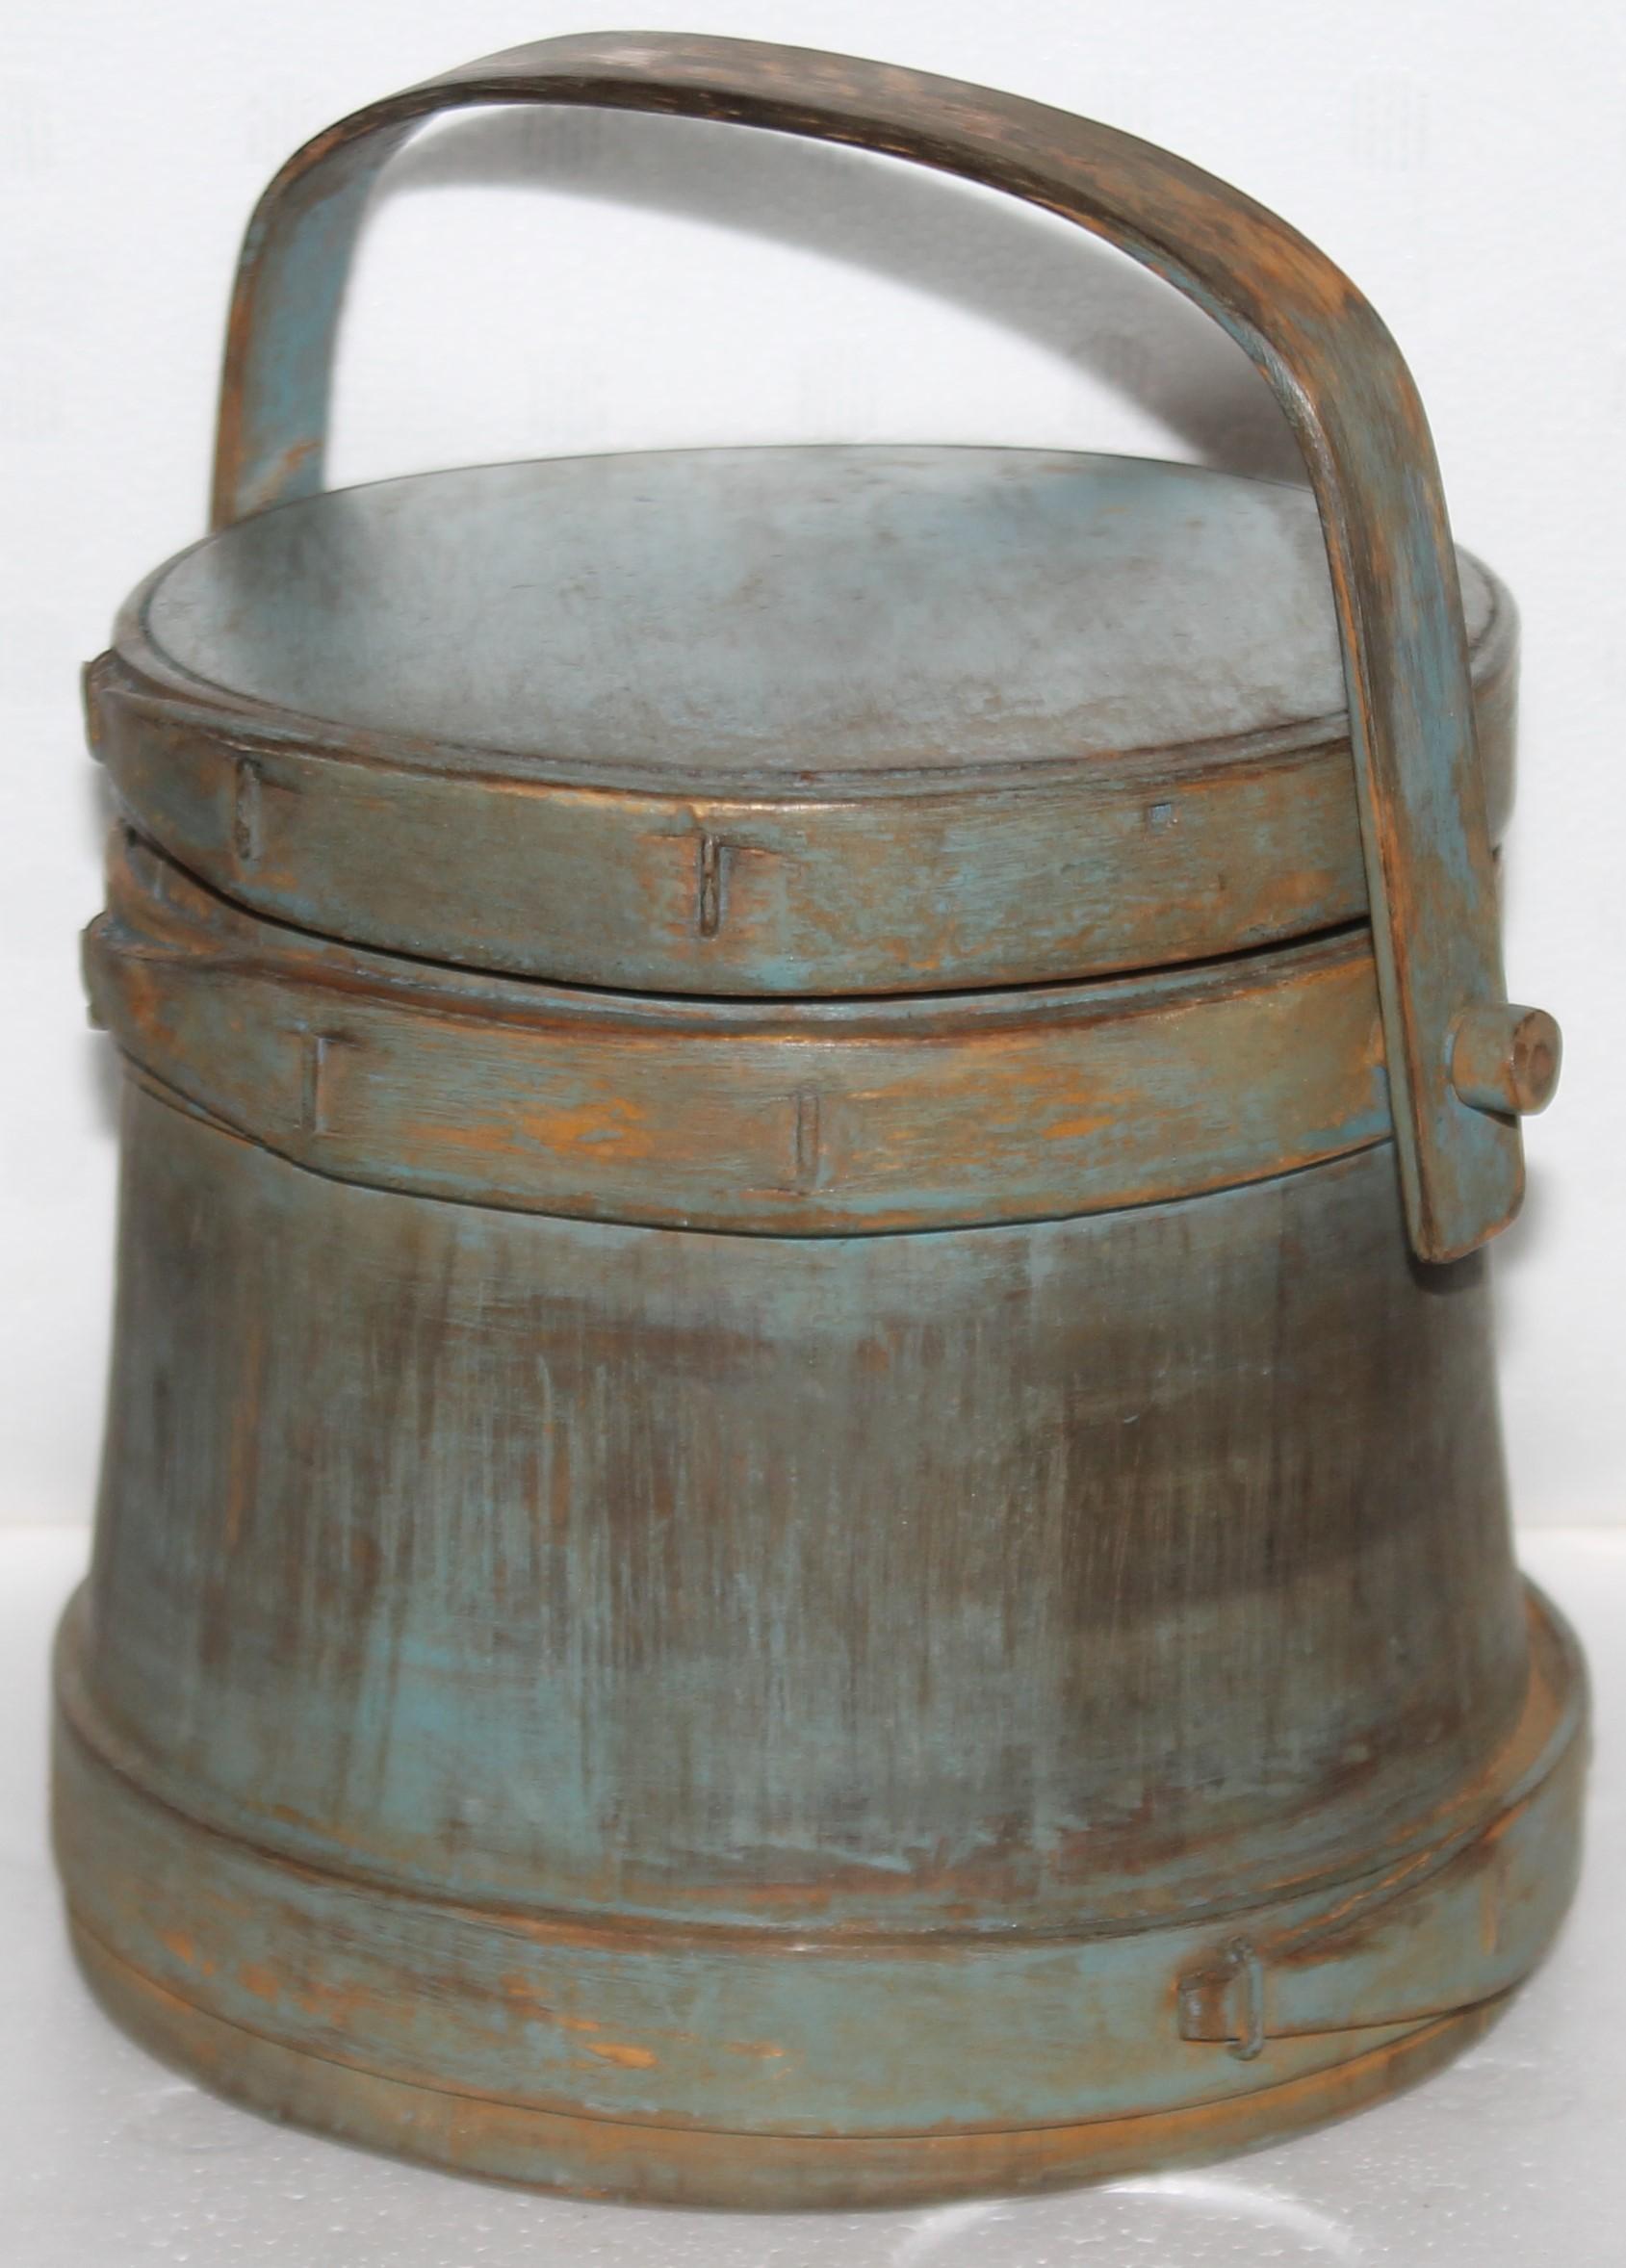 This 19thc blue painted furkin or sugar bucket is such a cute small scale size and great later blue painted surface.